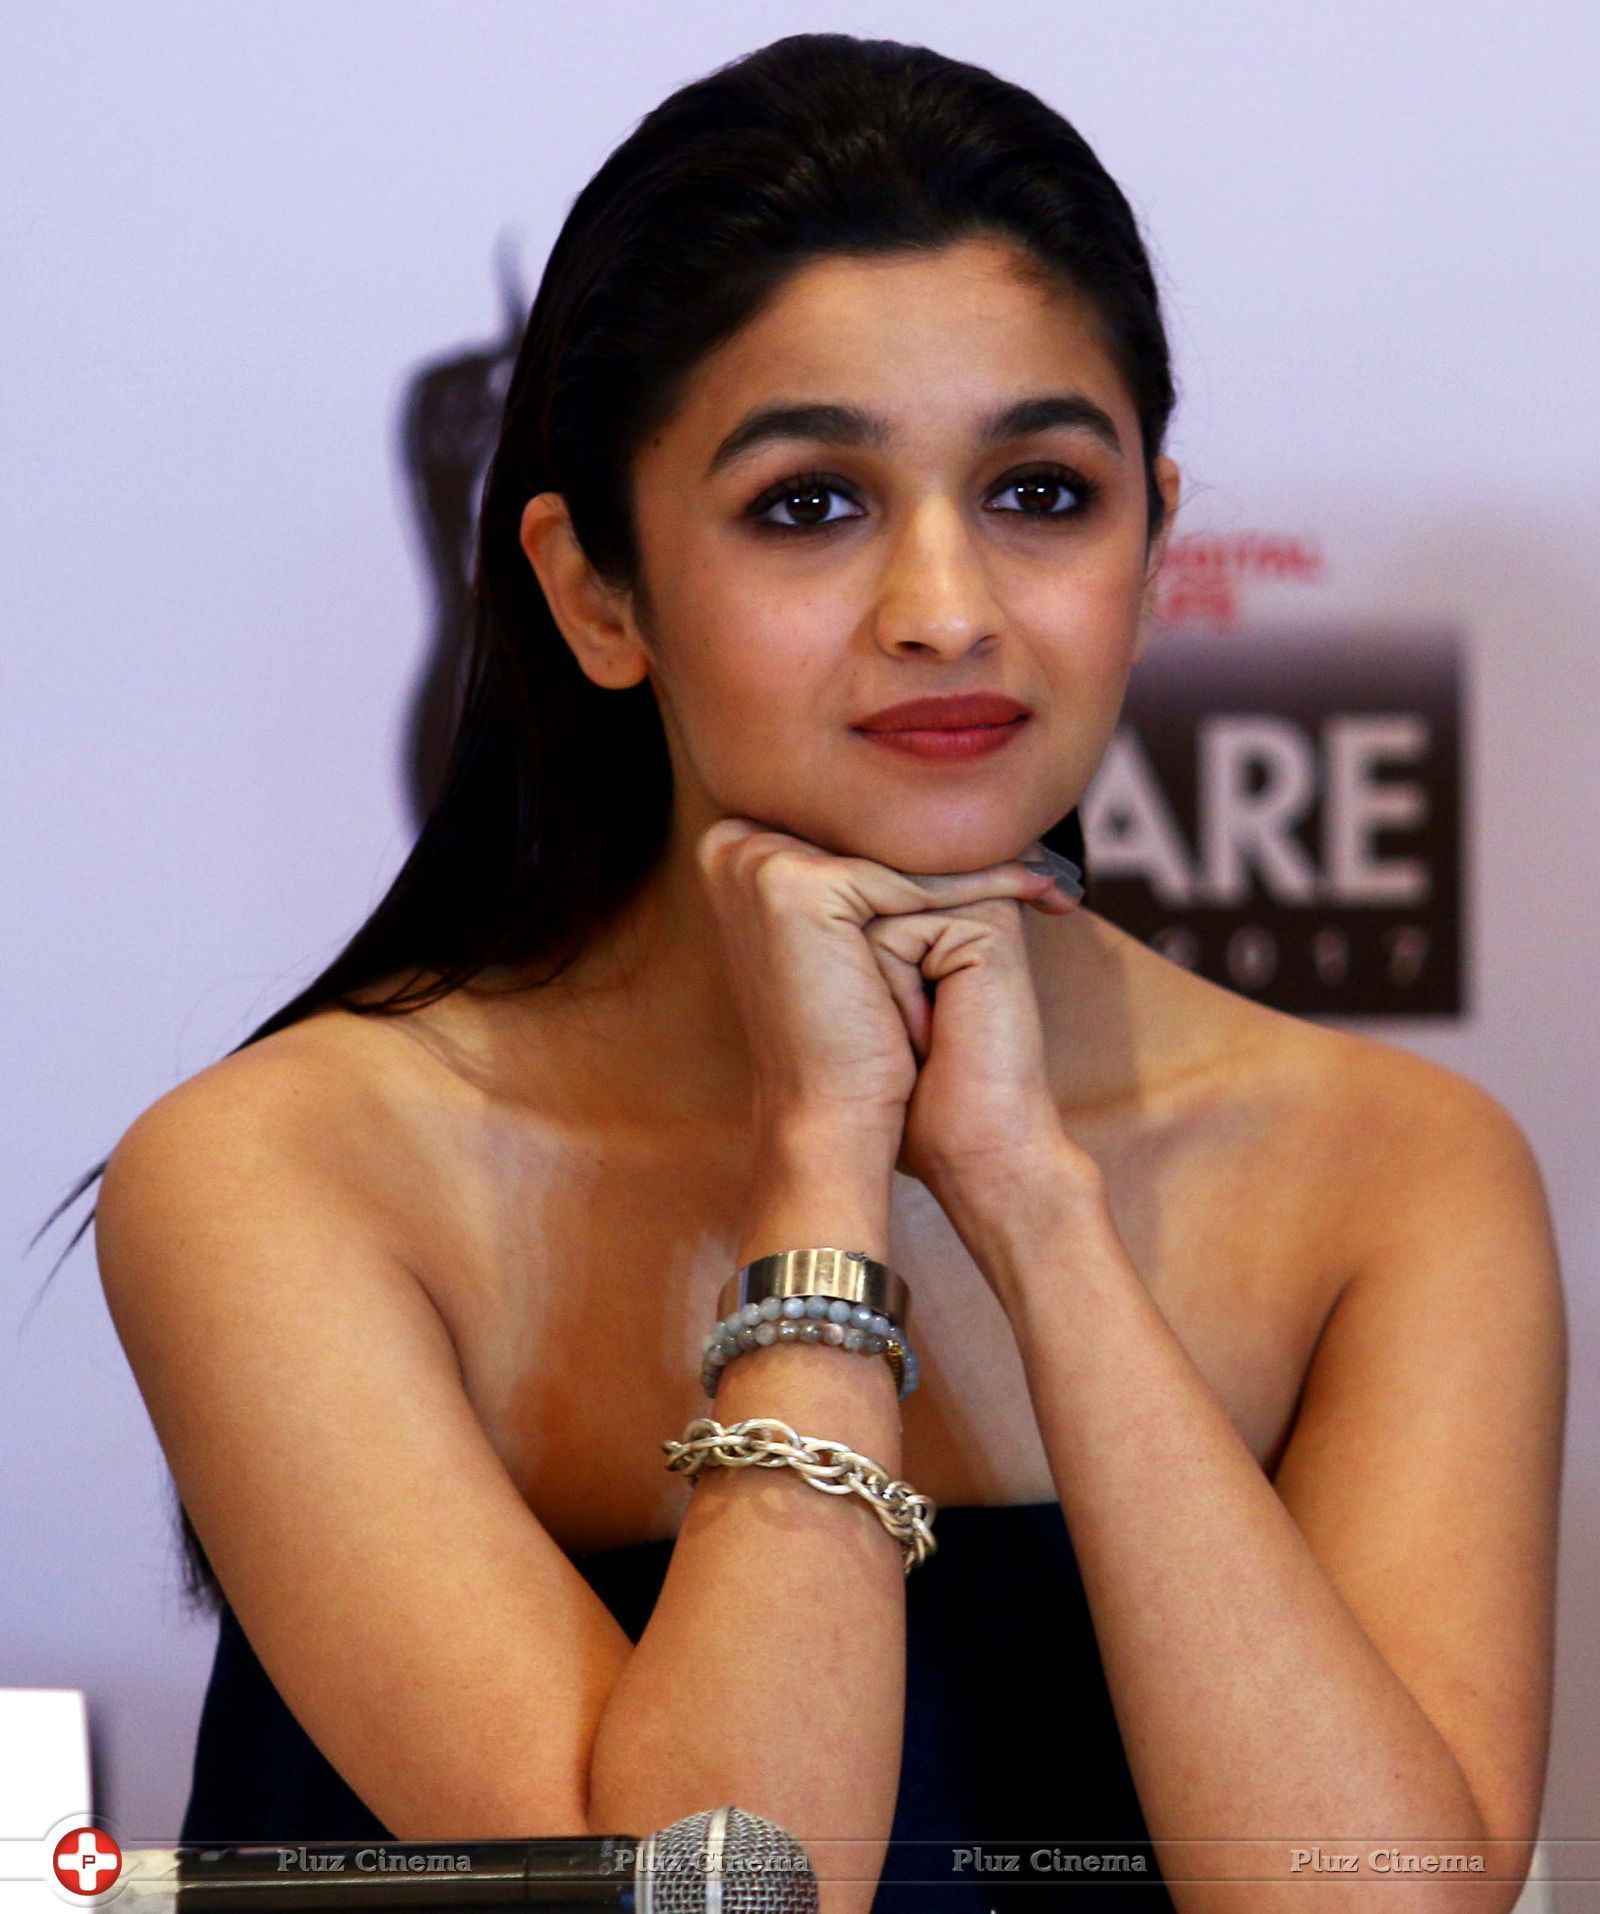 Alia Bhatt - Announcement Of 62nd Jio Filmfare Awards 2016 Pictures | Picture 1454042